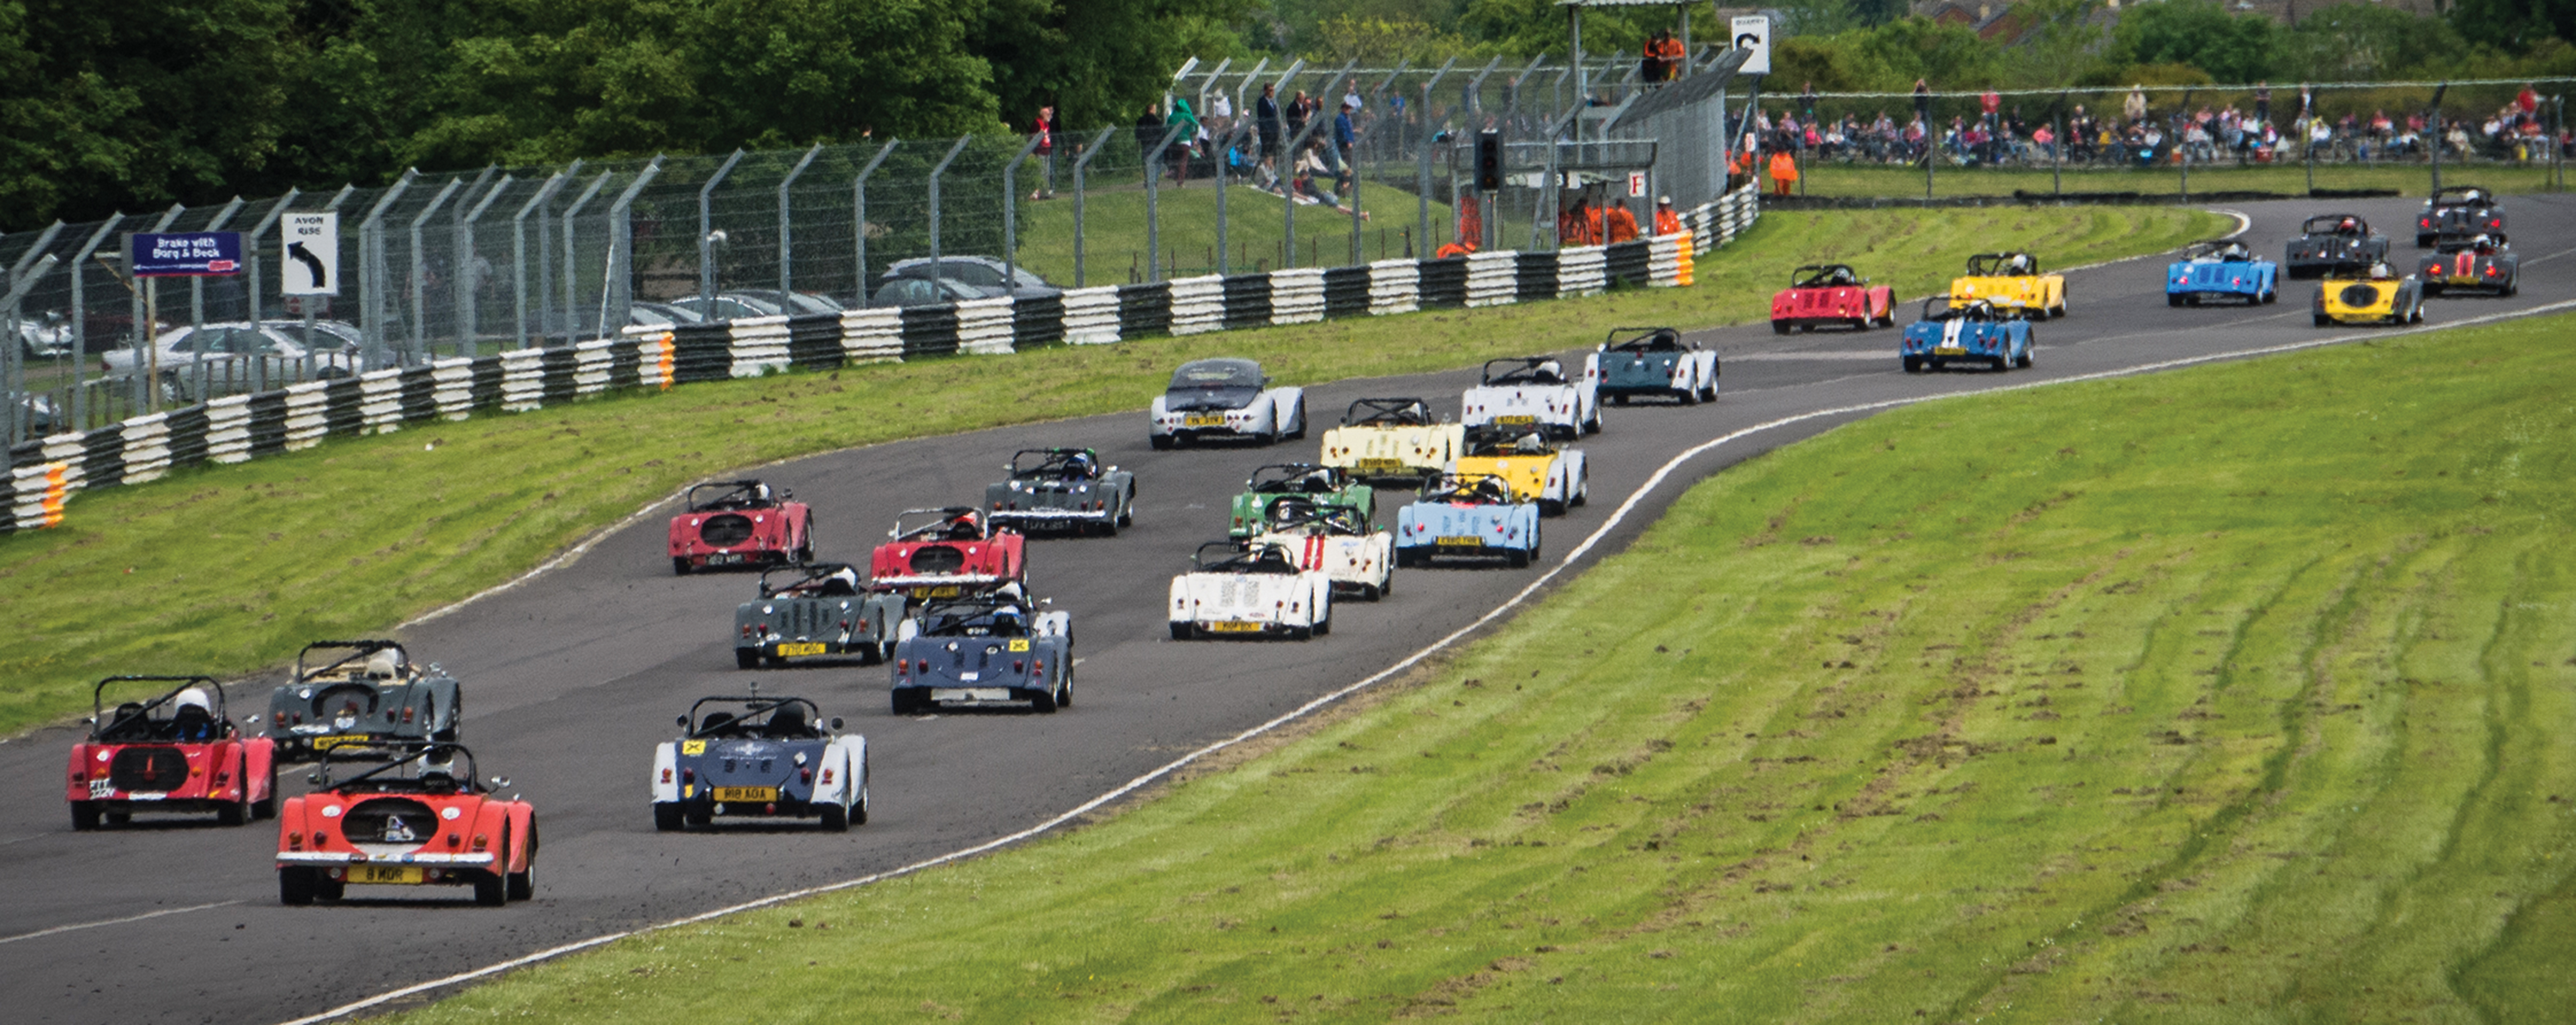 Morgan Challenge race at Castle Combe